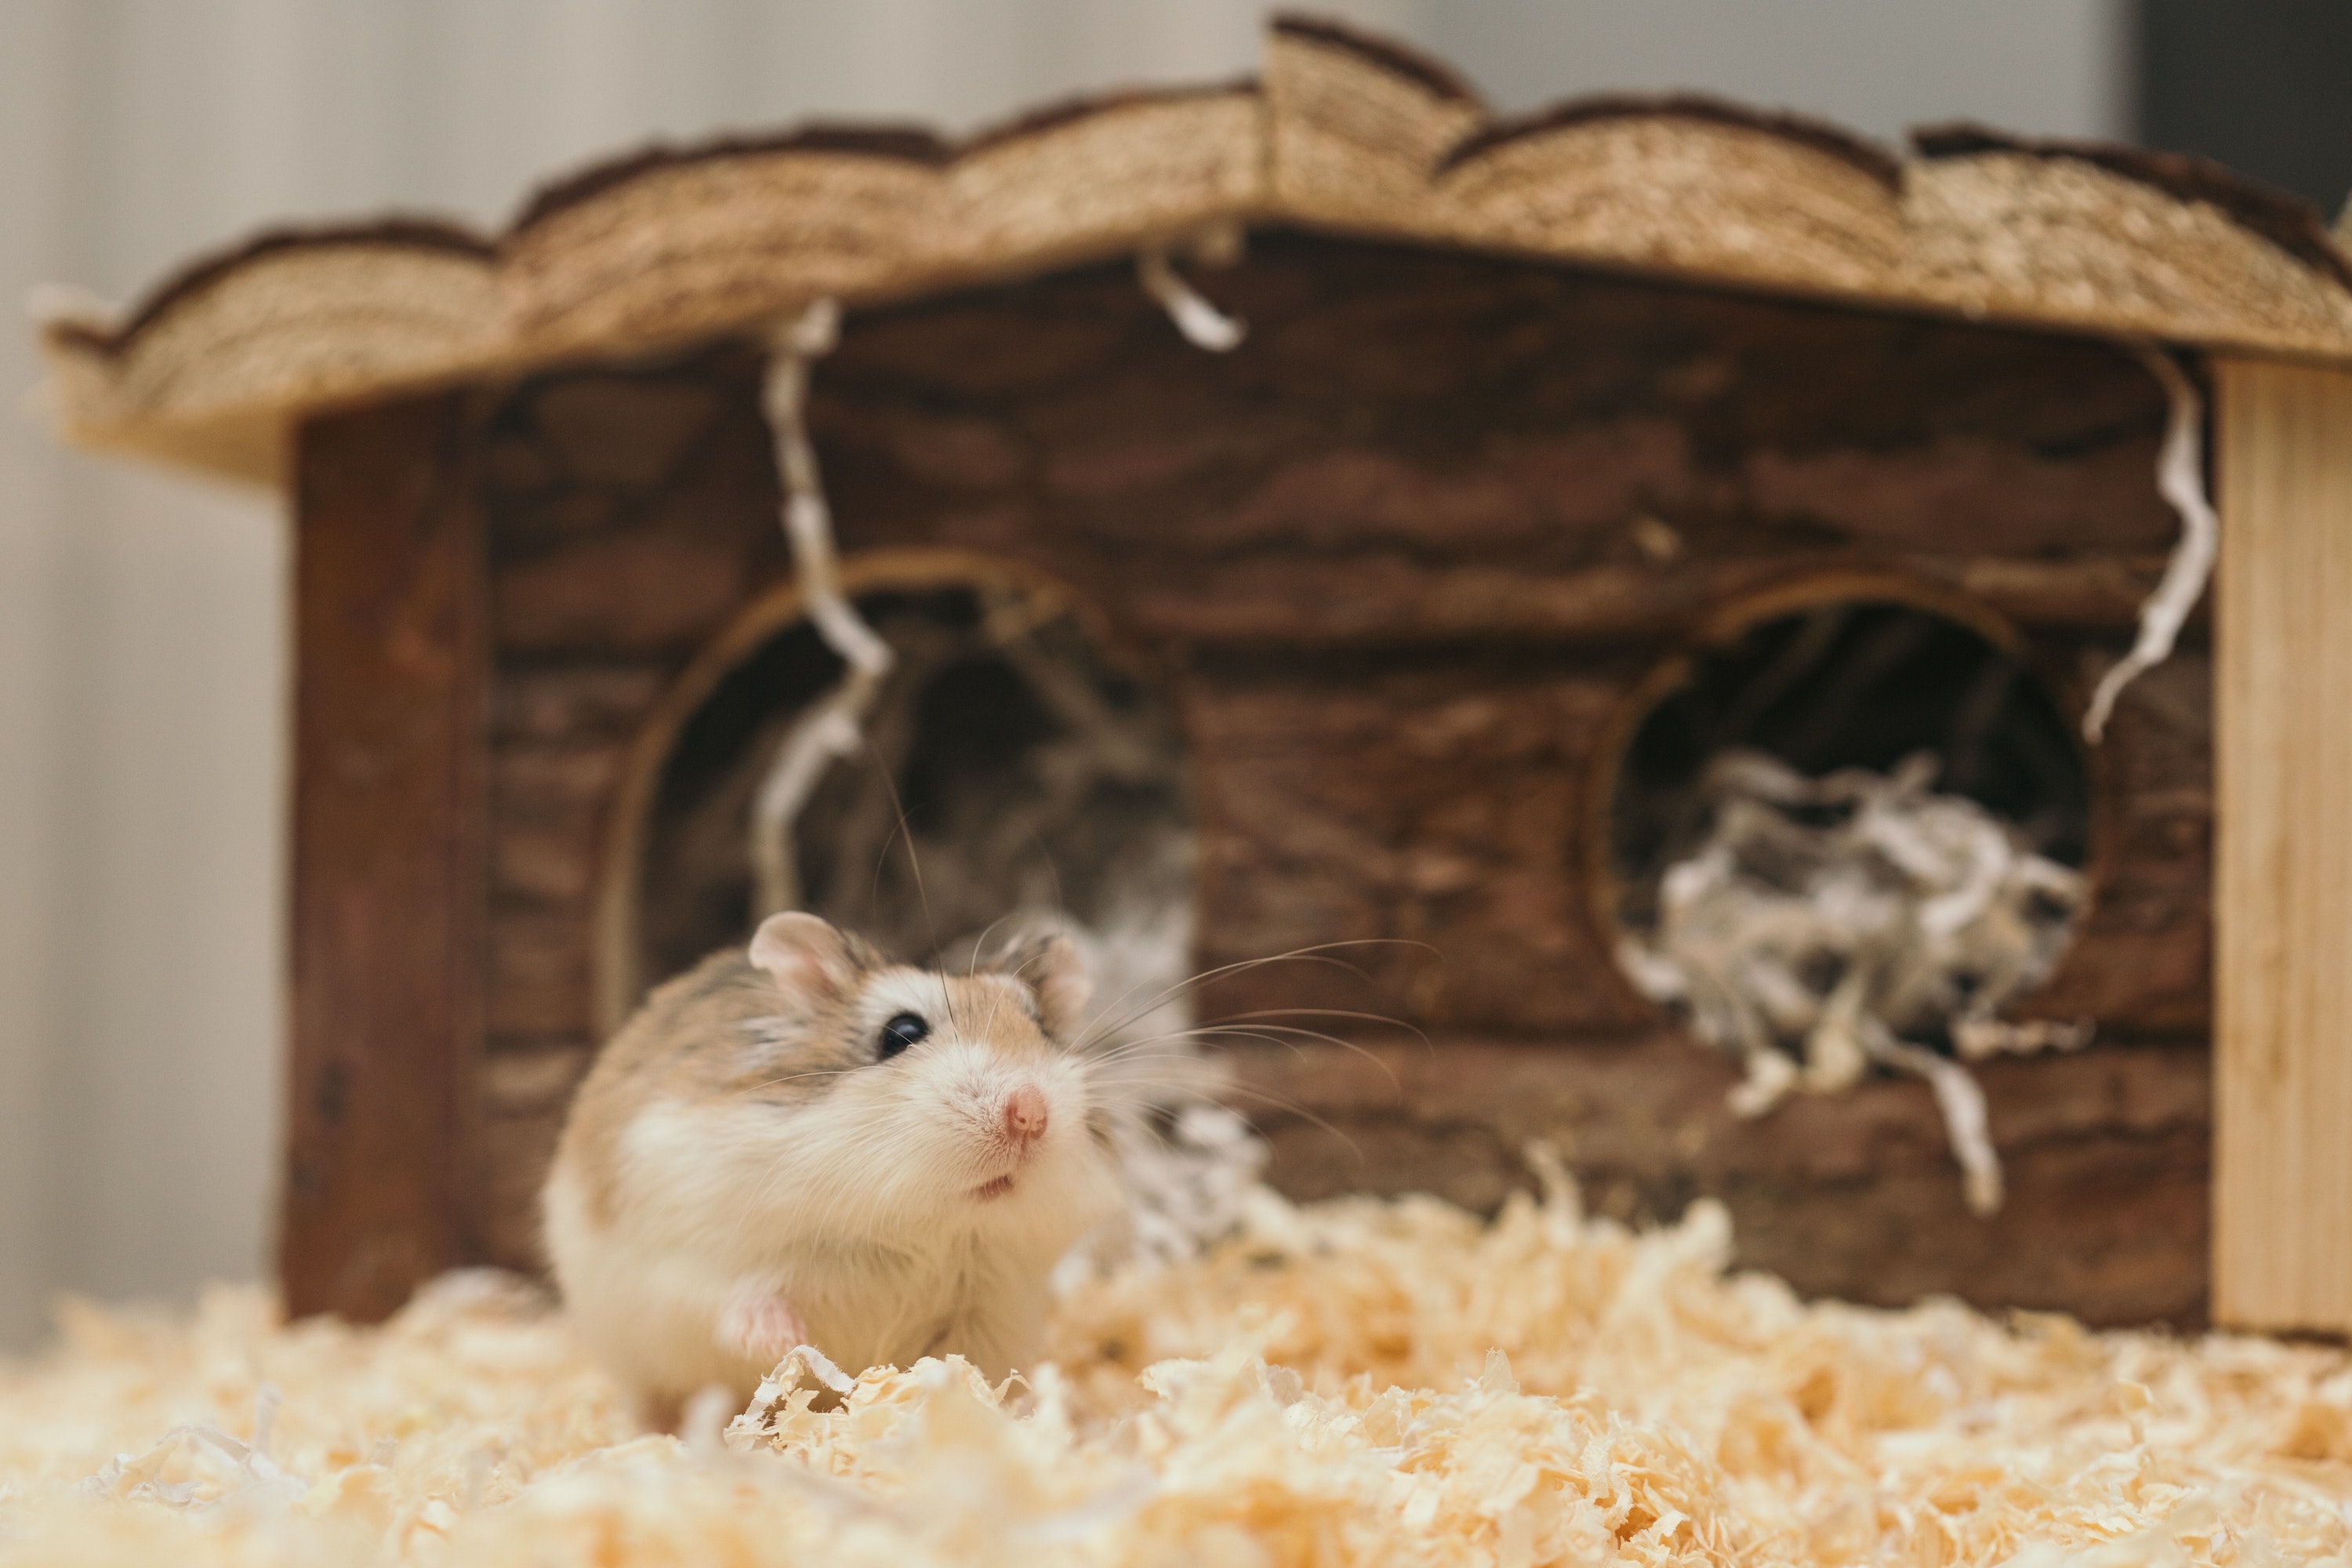 How Long Do Hamsters Live? A Hamster Rescue Expert Weighs In